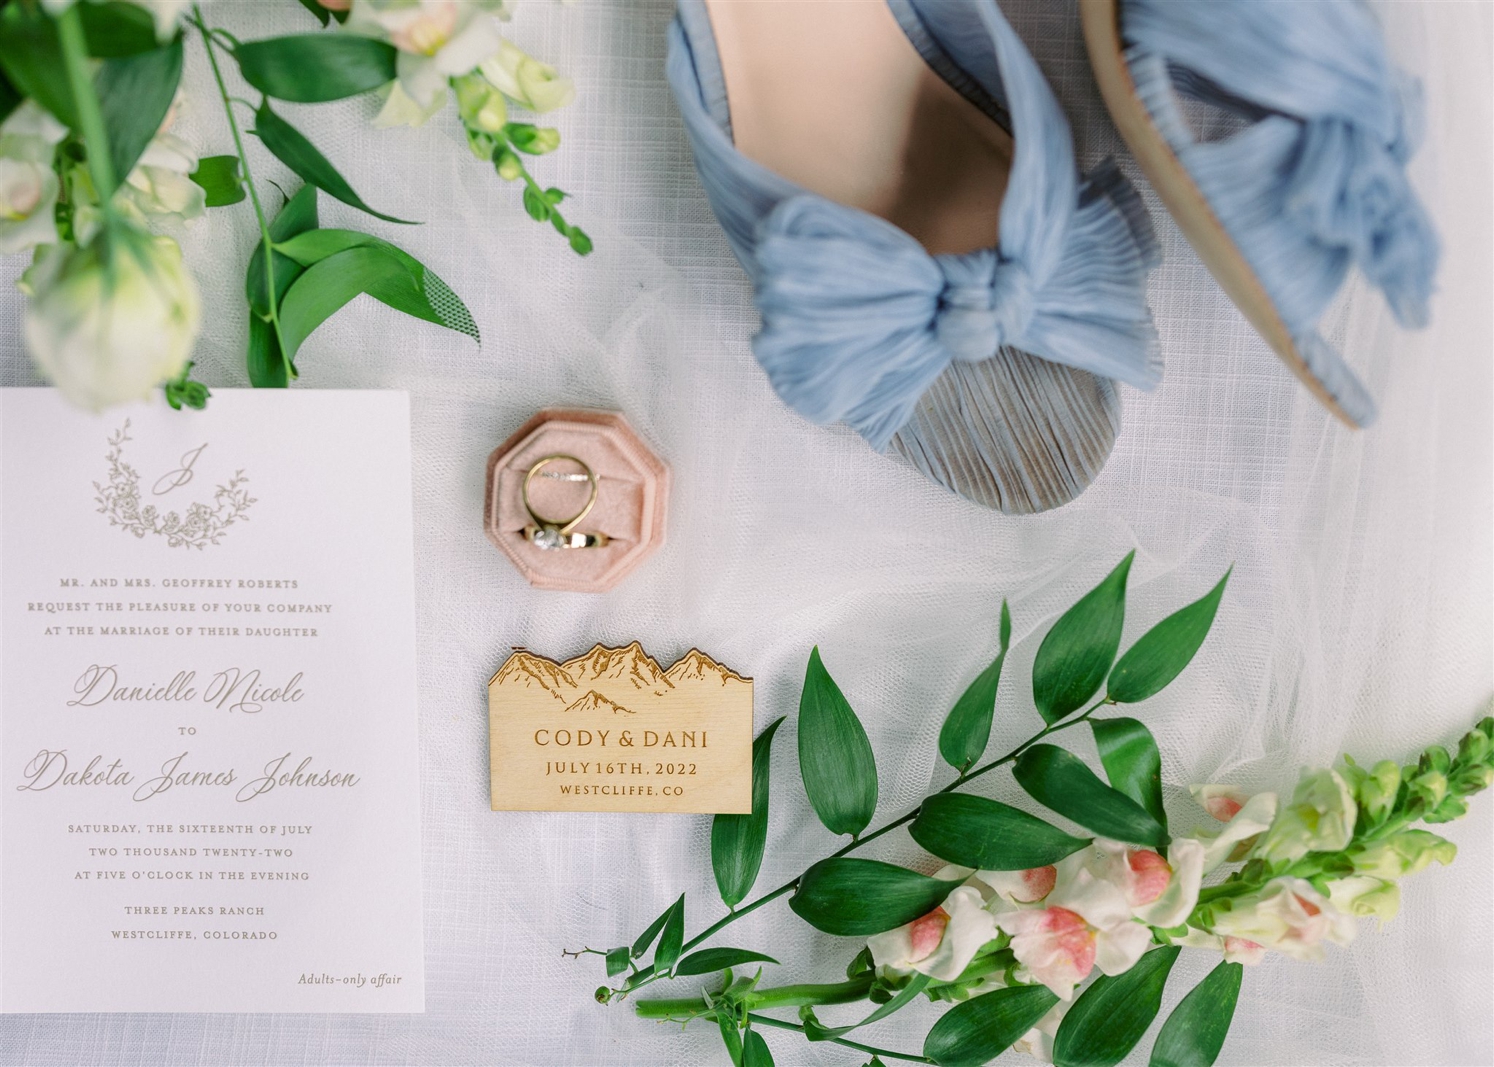 Wedding details shot of light blue shoes, rings in pink ring box, and invitation | McArthur Weddings and Events